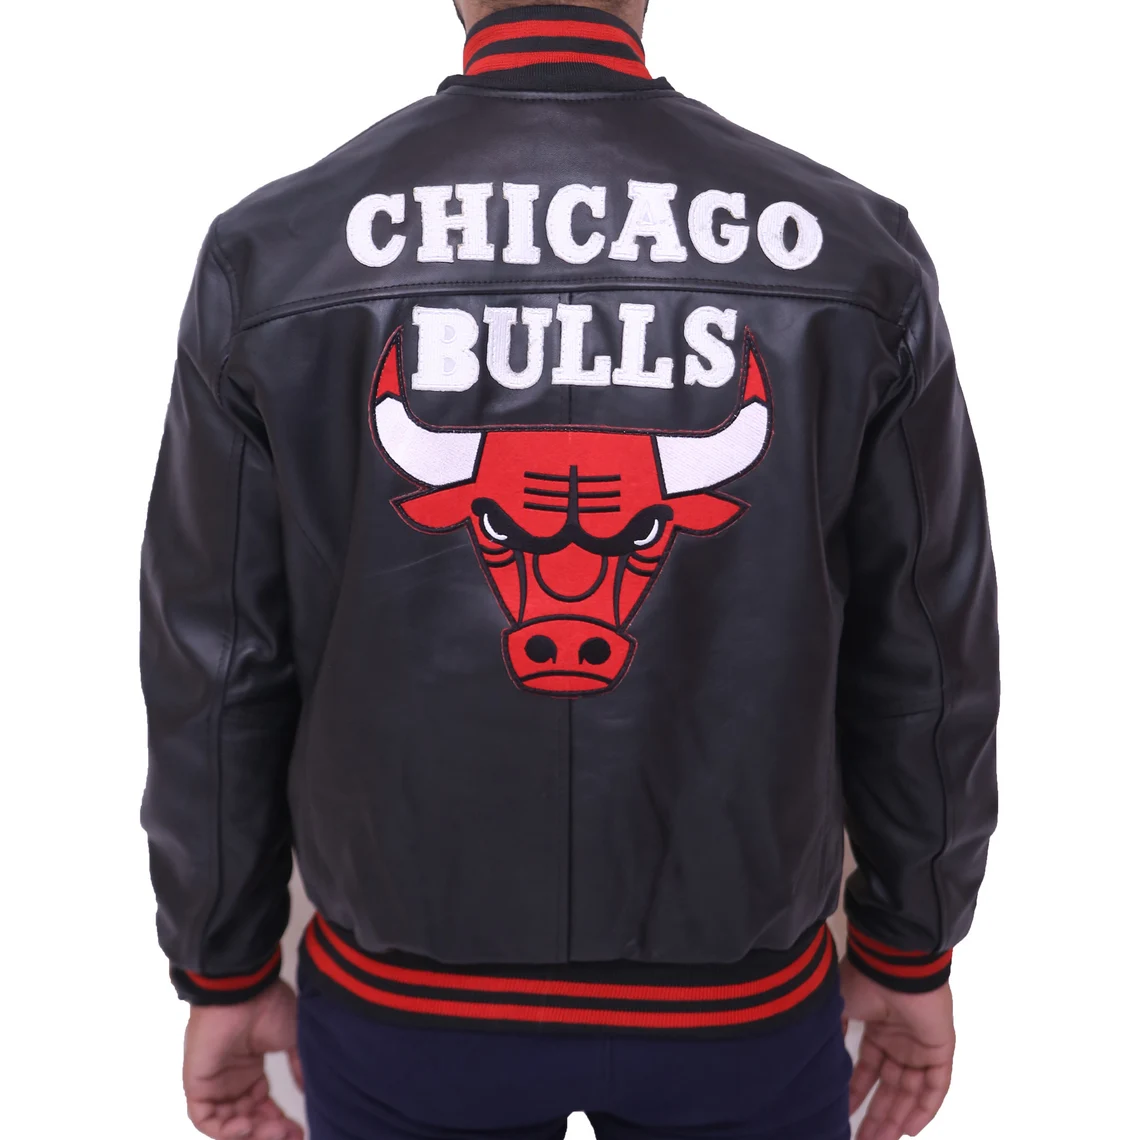 NBA Chicago Bulls Jacket With Back Spell Out